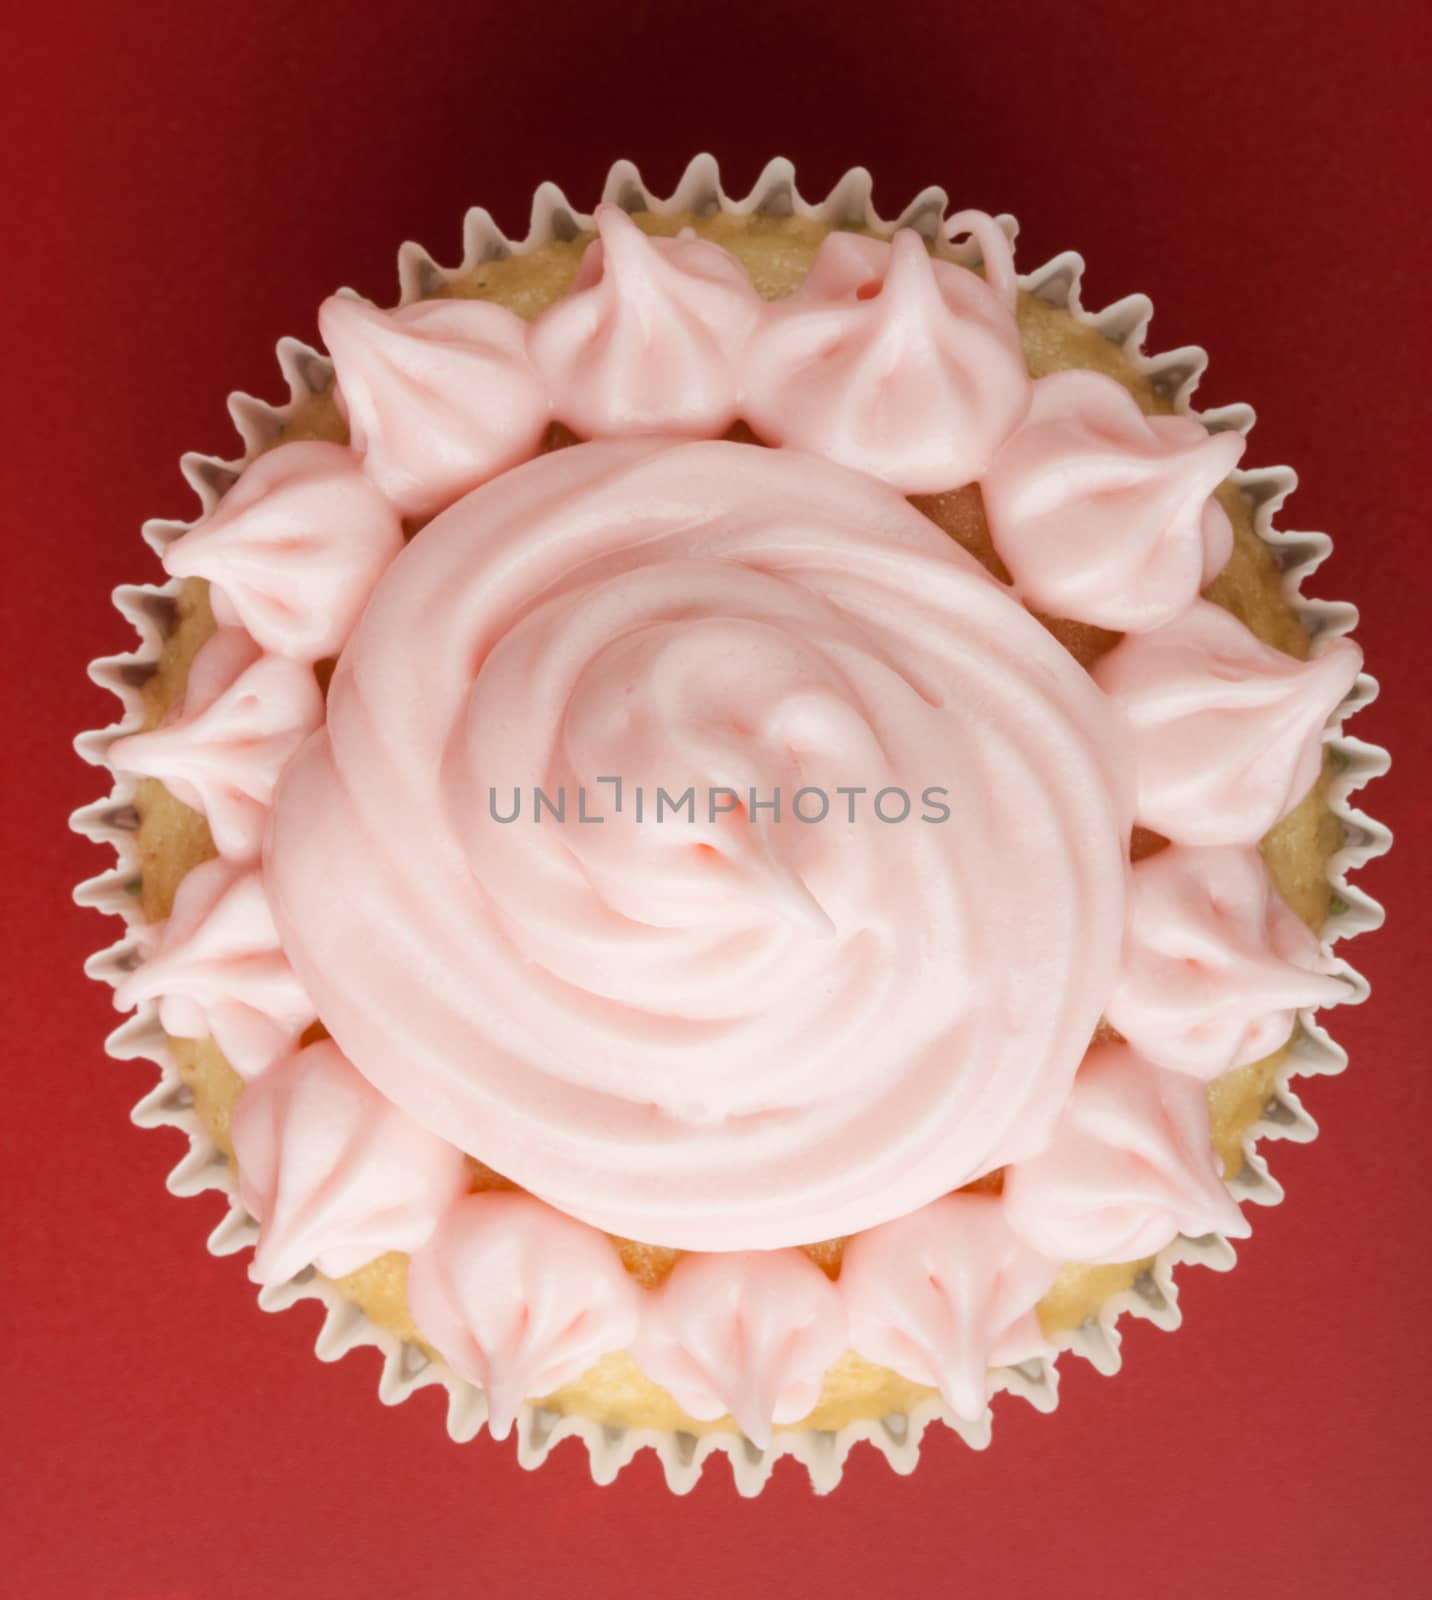 Top view close-up of nice cupcake with pink icing, red background